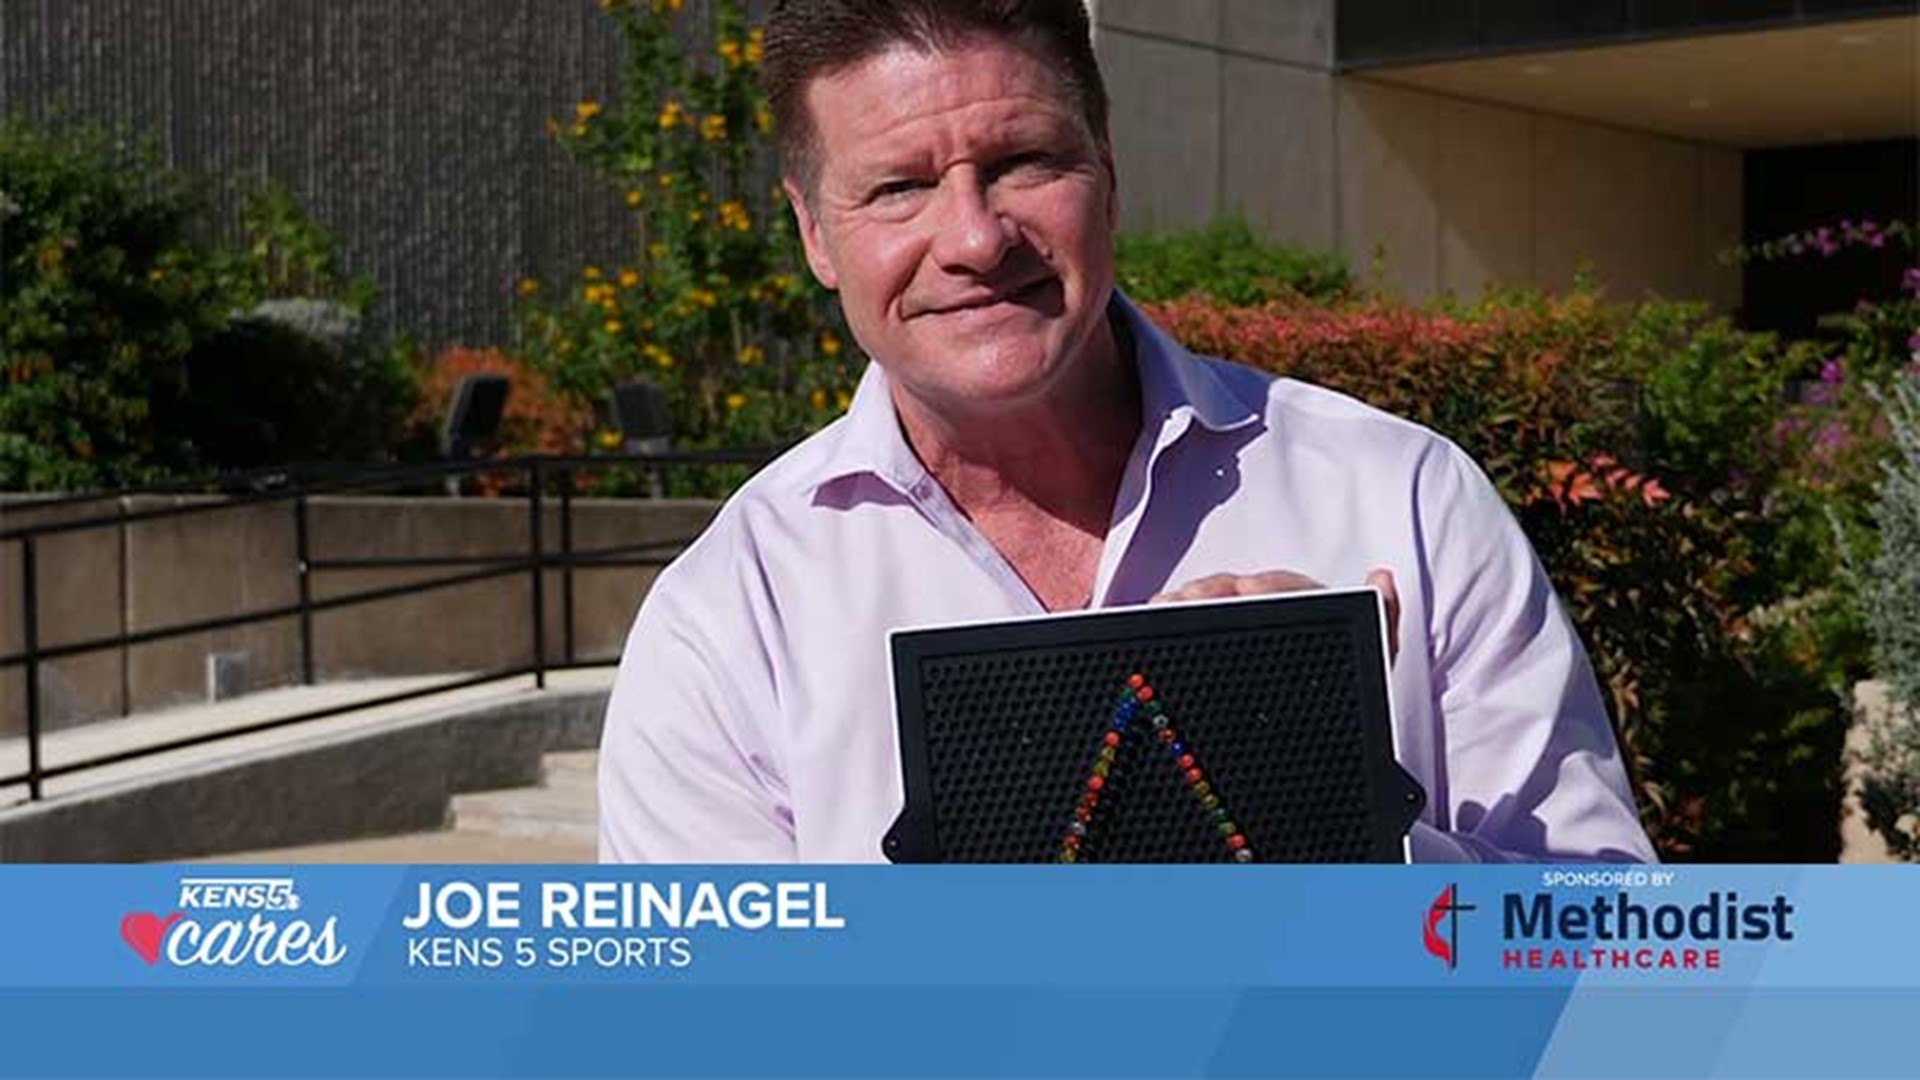 KENS 5's Joe Reinagel says one of his favorite toys growing up was a Lite-Brite! You can help create lasting memories for children in need this holiday season.